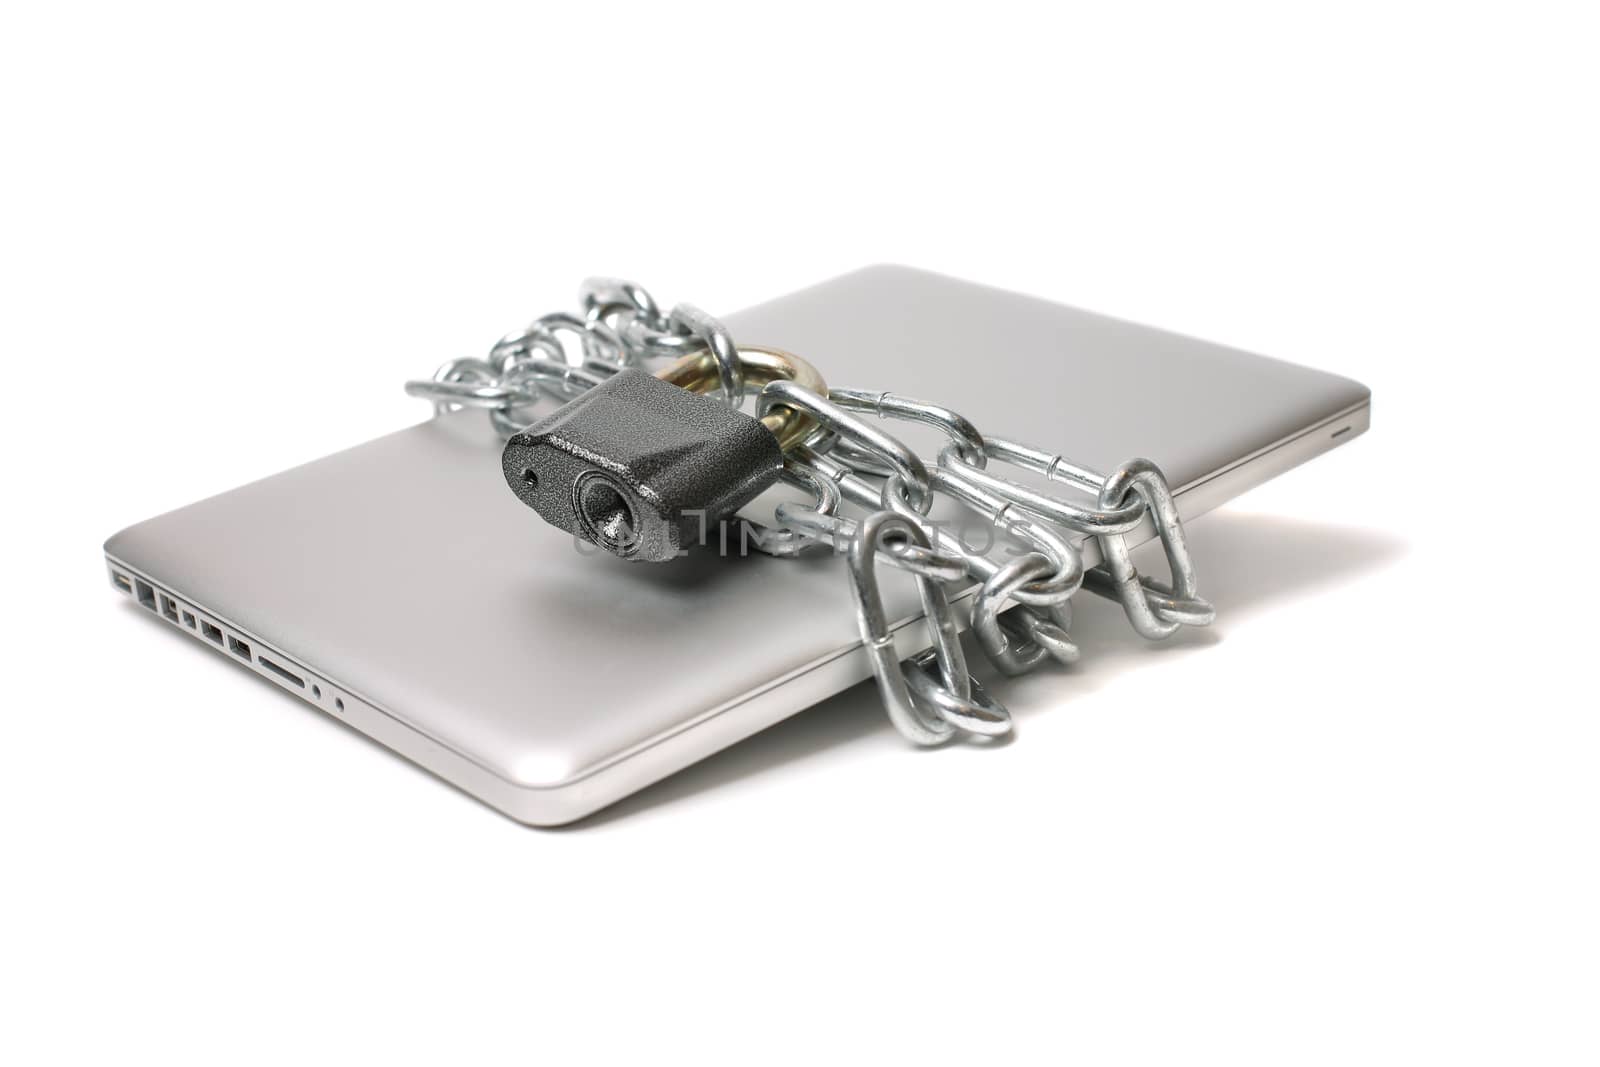 modern aluminium laptop wound with chain and closed on lock